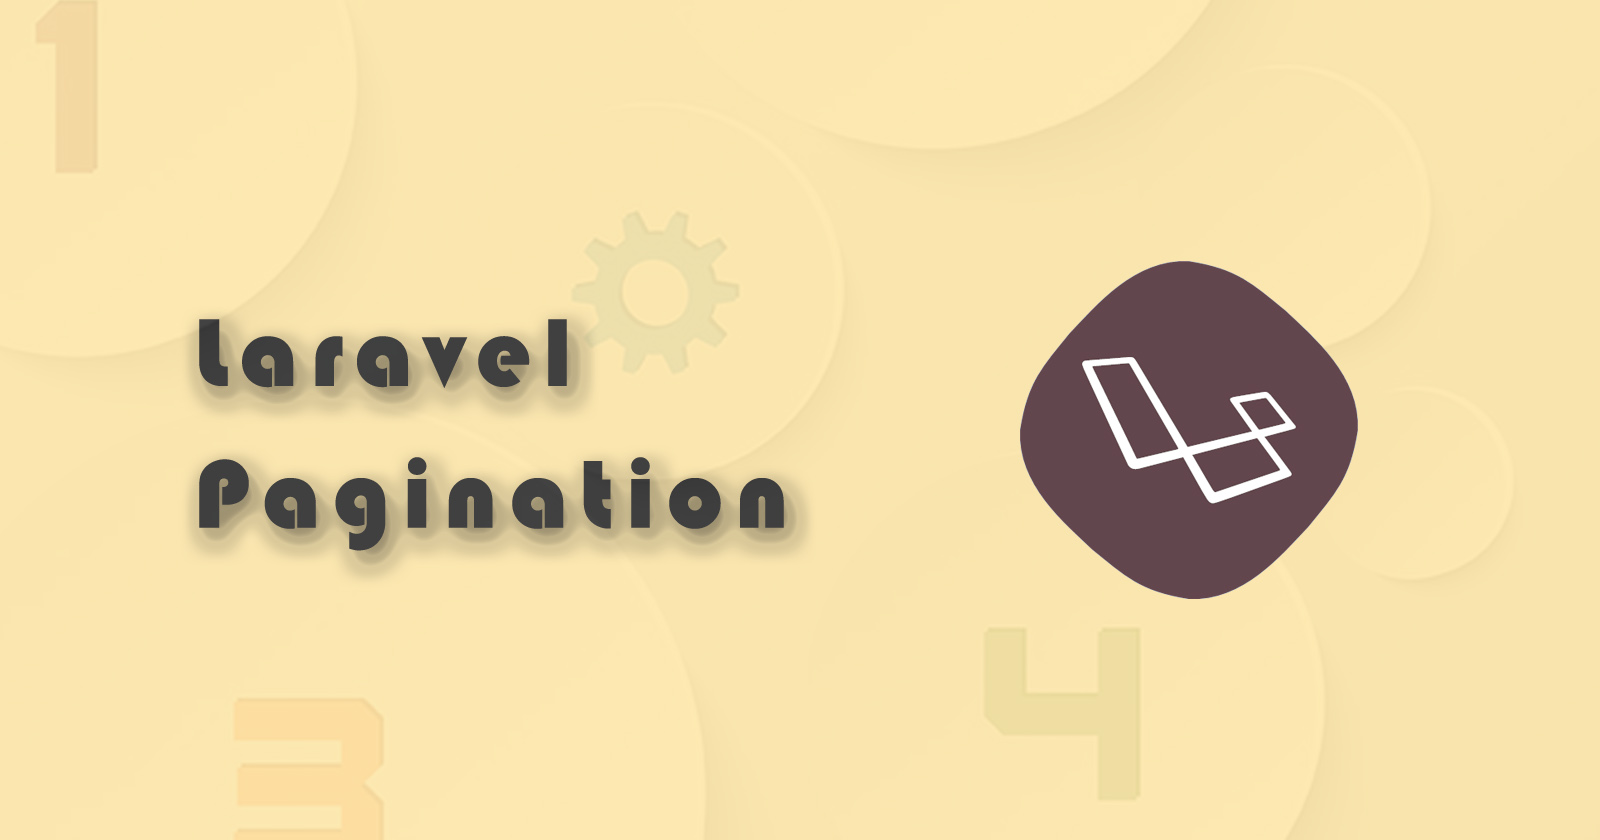 How to Make Pagination in Laravel 8 - Example Tutorial?